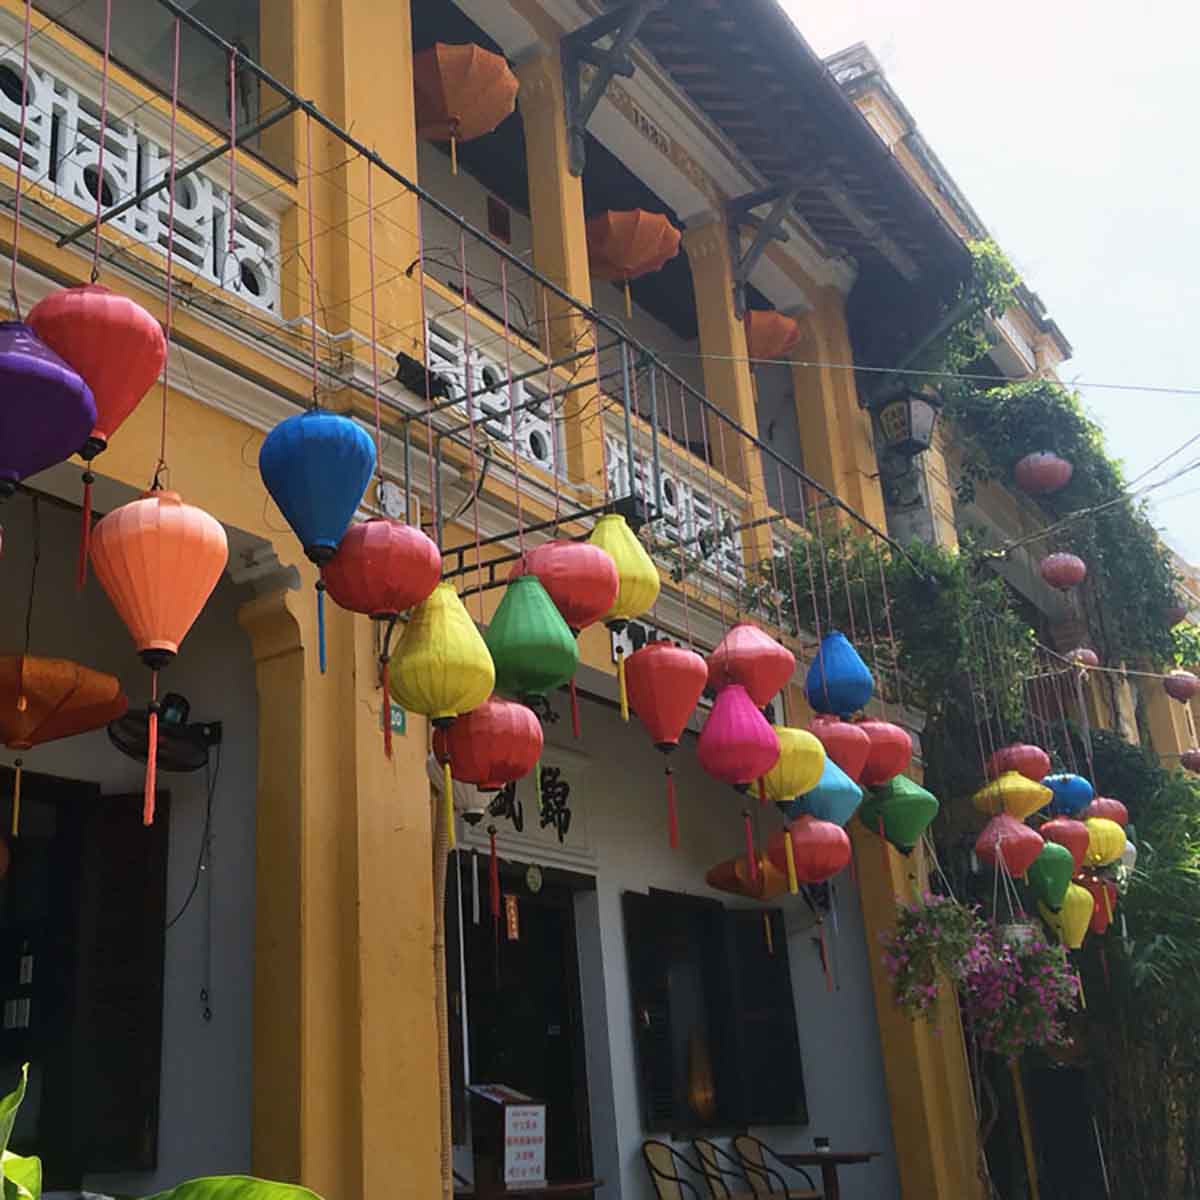 Life Lately in Hoi An, Vietnam